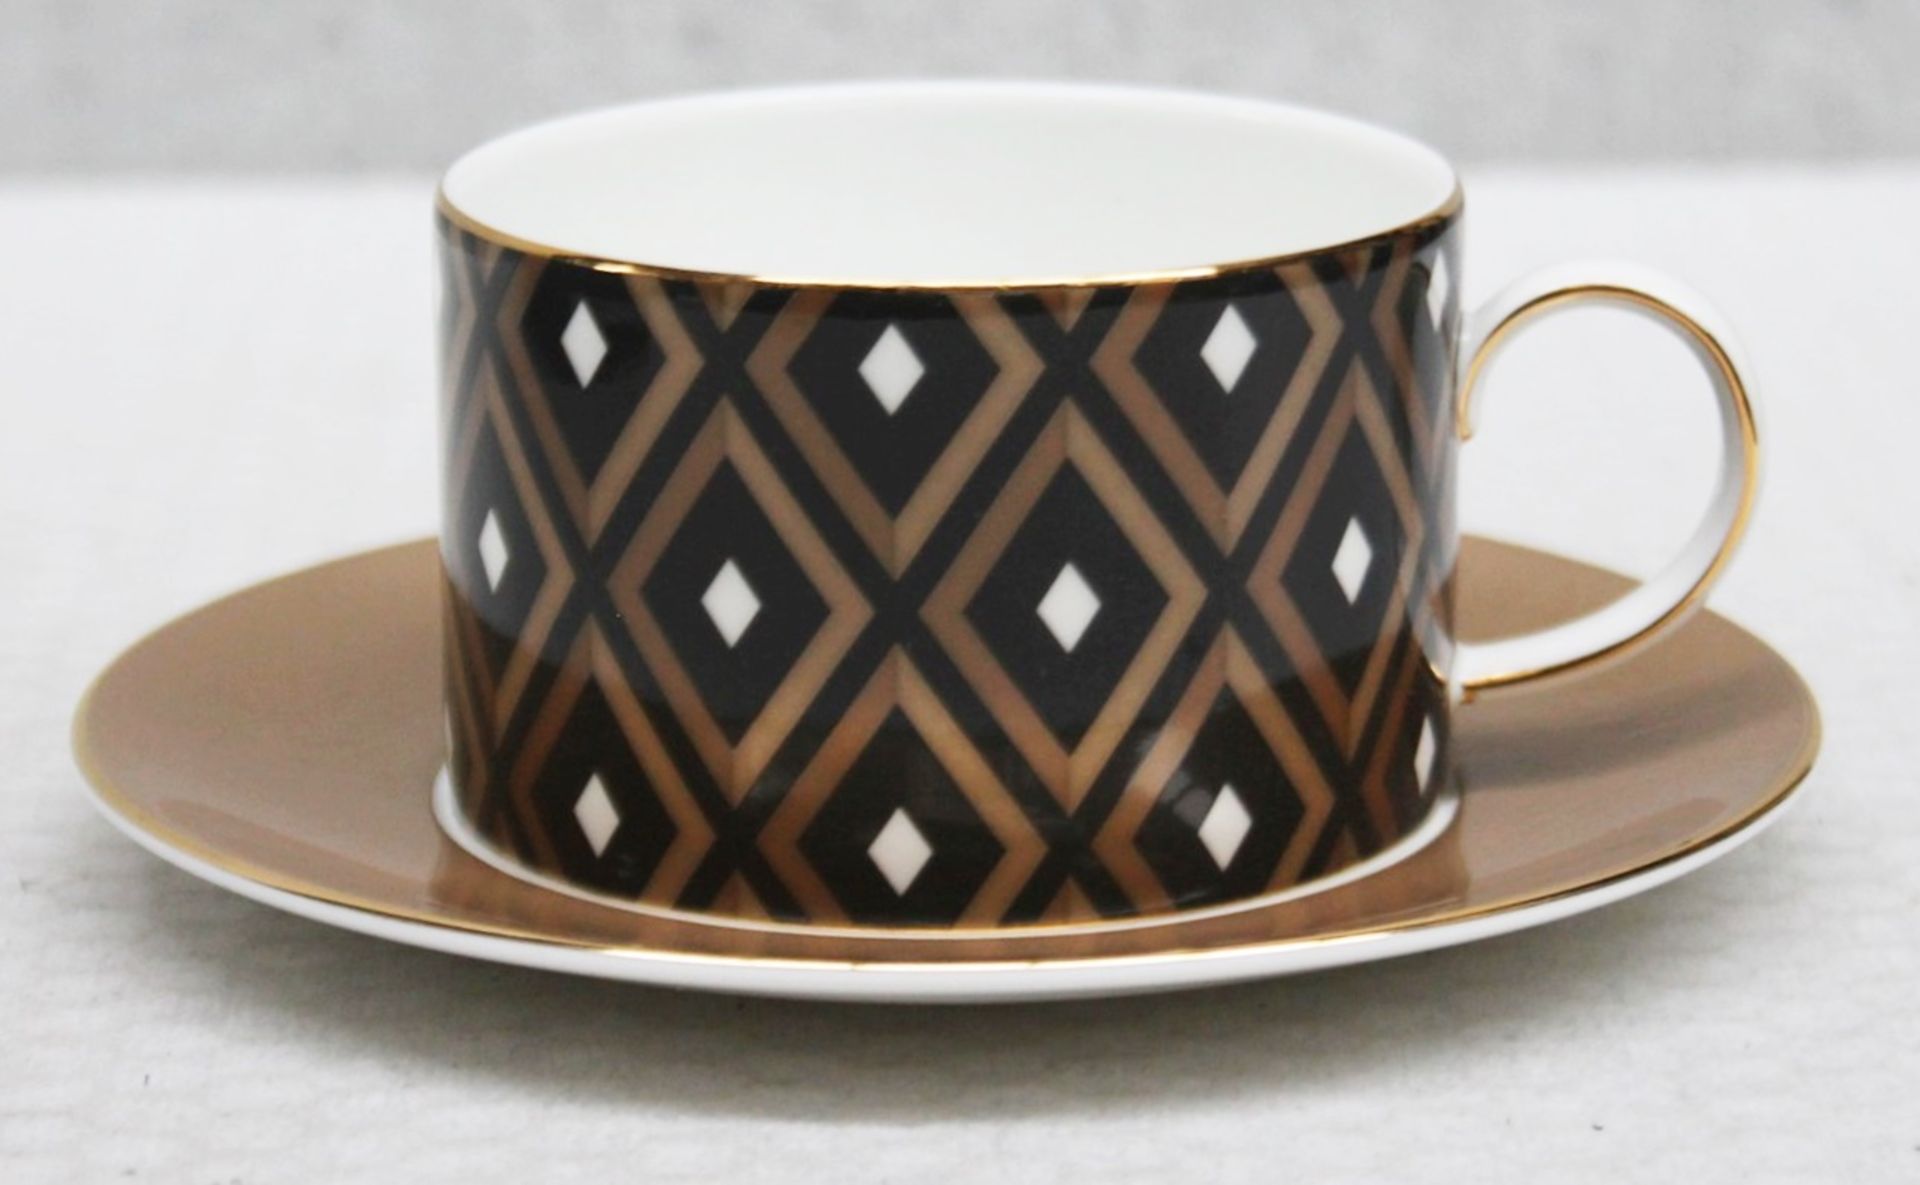 1 x WEDGWOOD 'Arris' Fine Bone China Teacup and Saucer, With An Art Deco Geometric print - Boxed - Image 3 of 6